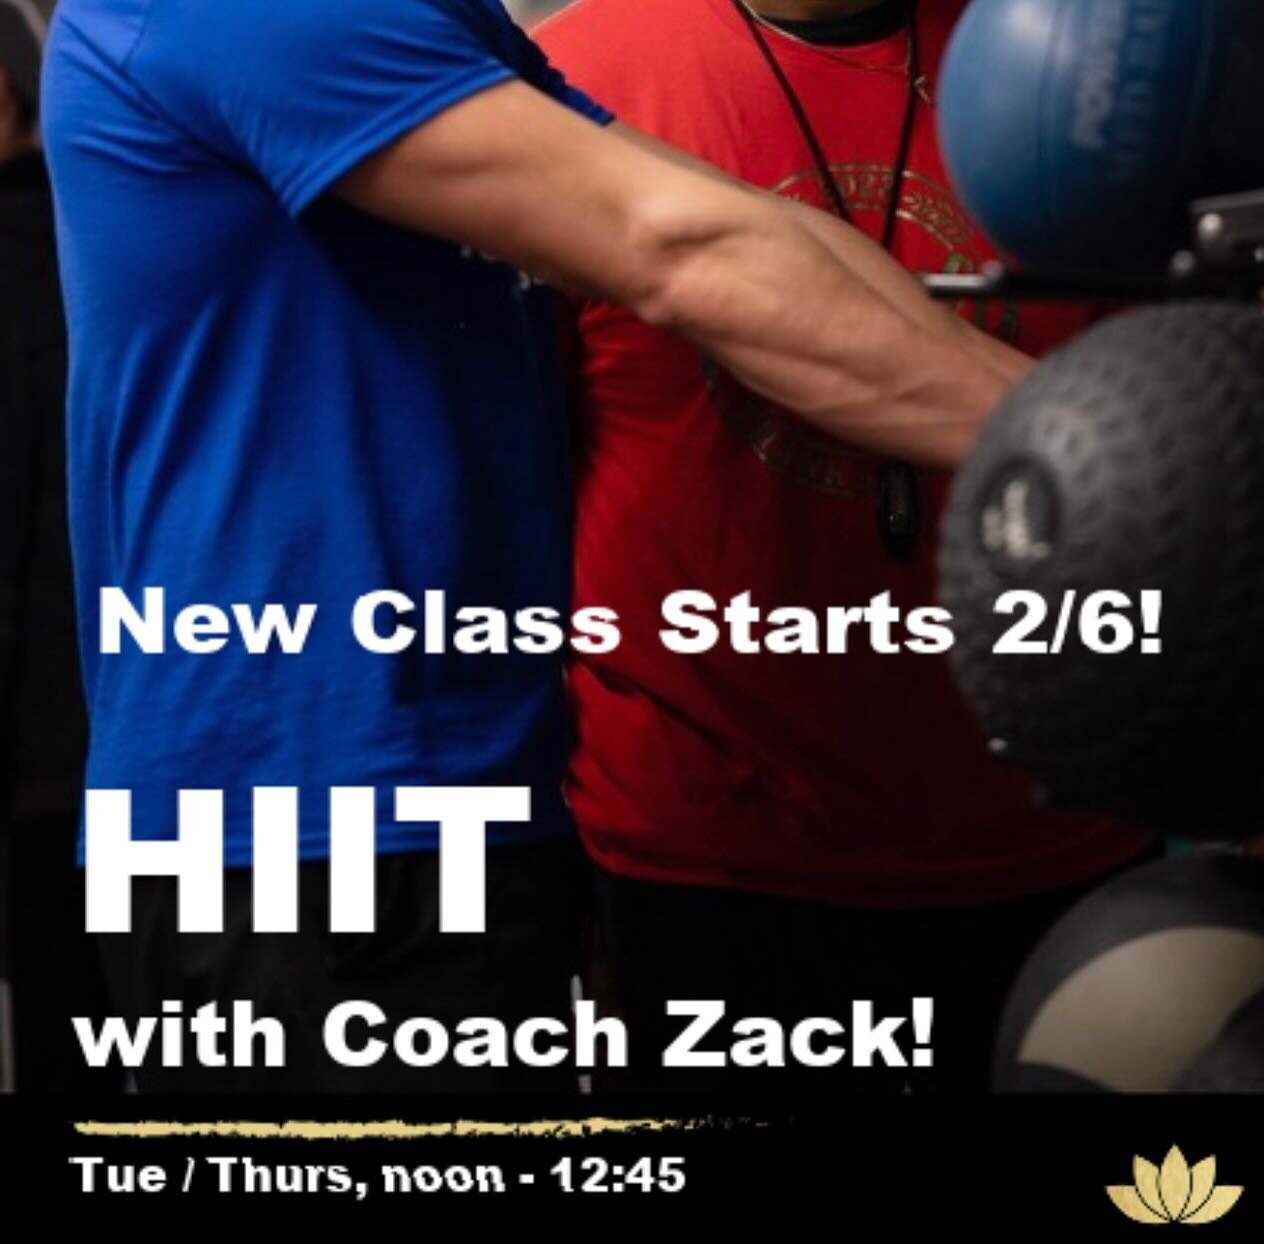 ⭐️NEW CLASS⭐️
High-Intensity Interval Training (HIIIT)class is designed to push your limits and deliver results. Heart pounding, full-body exercises that blend bursts of intense effort with brief periods of recovery. Be ready for a high energy atmosp